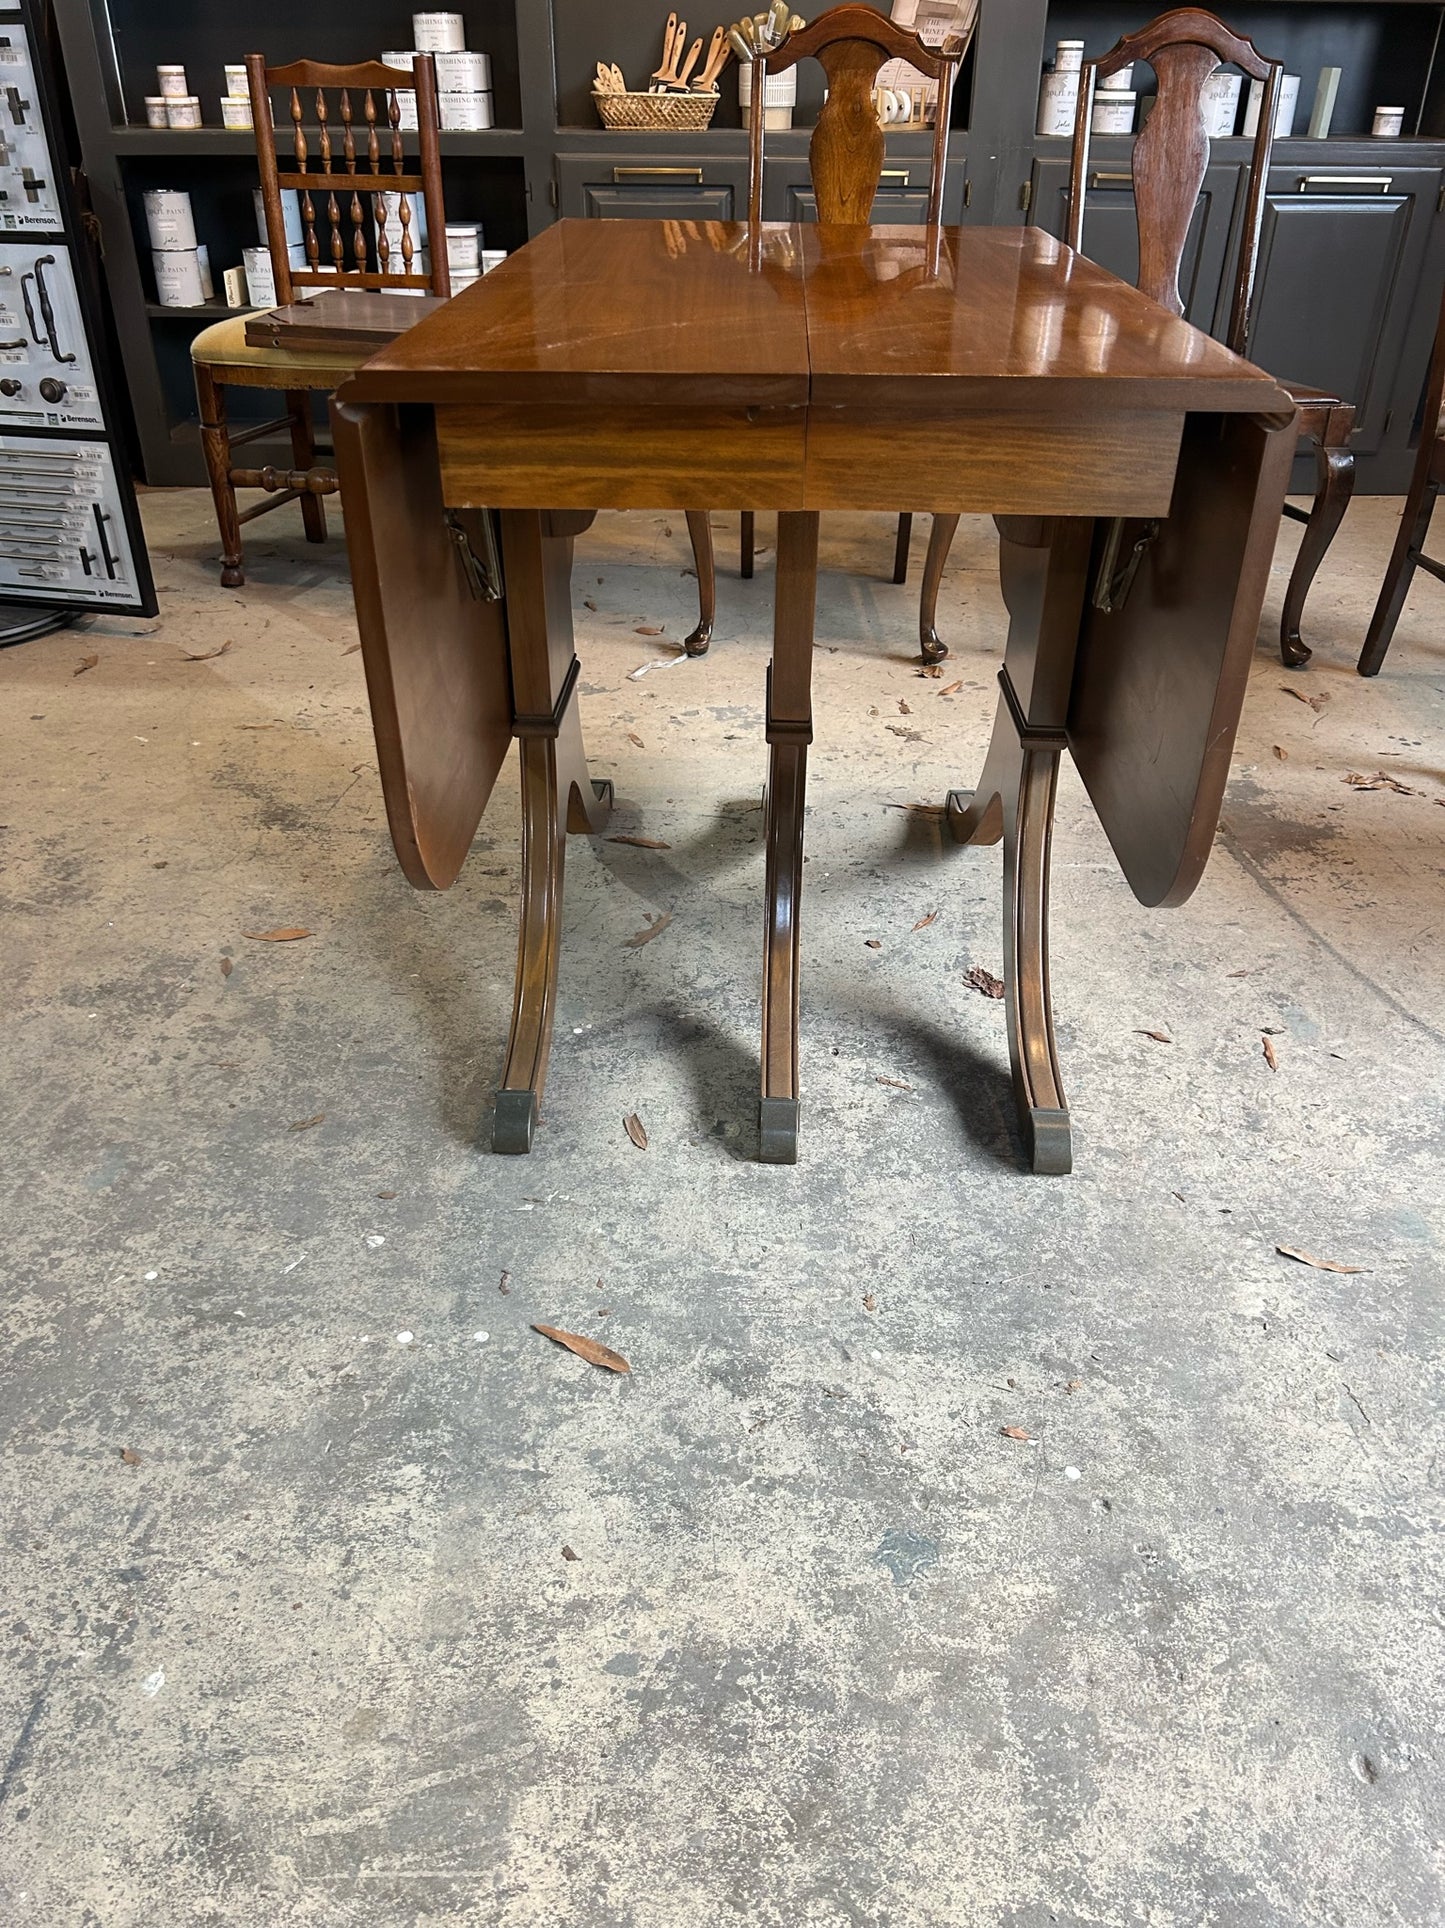 Dining table with 2 leaves (C)